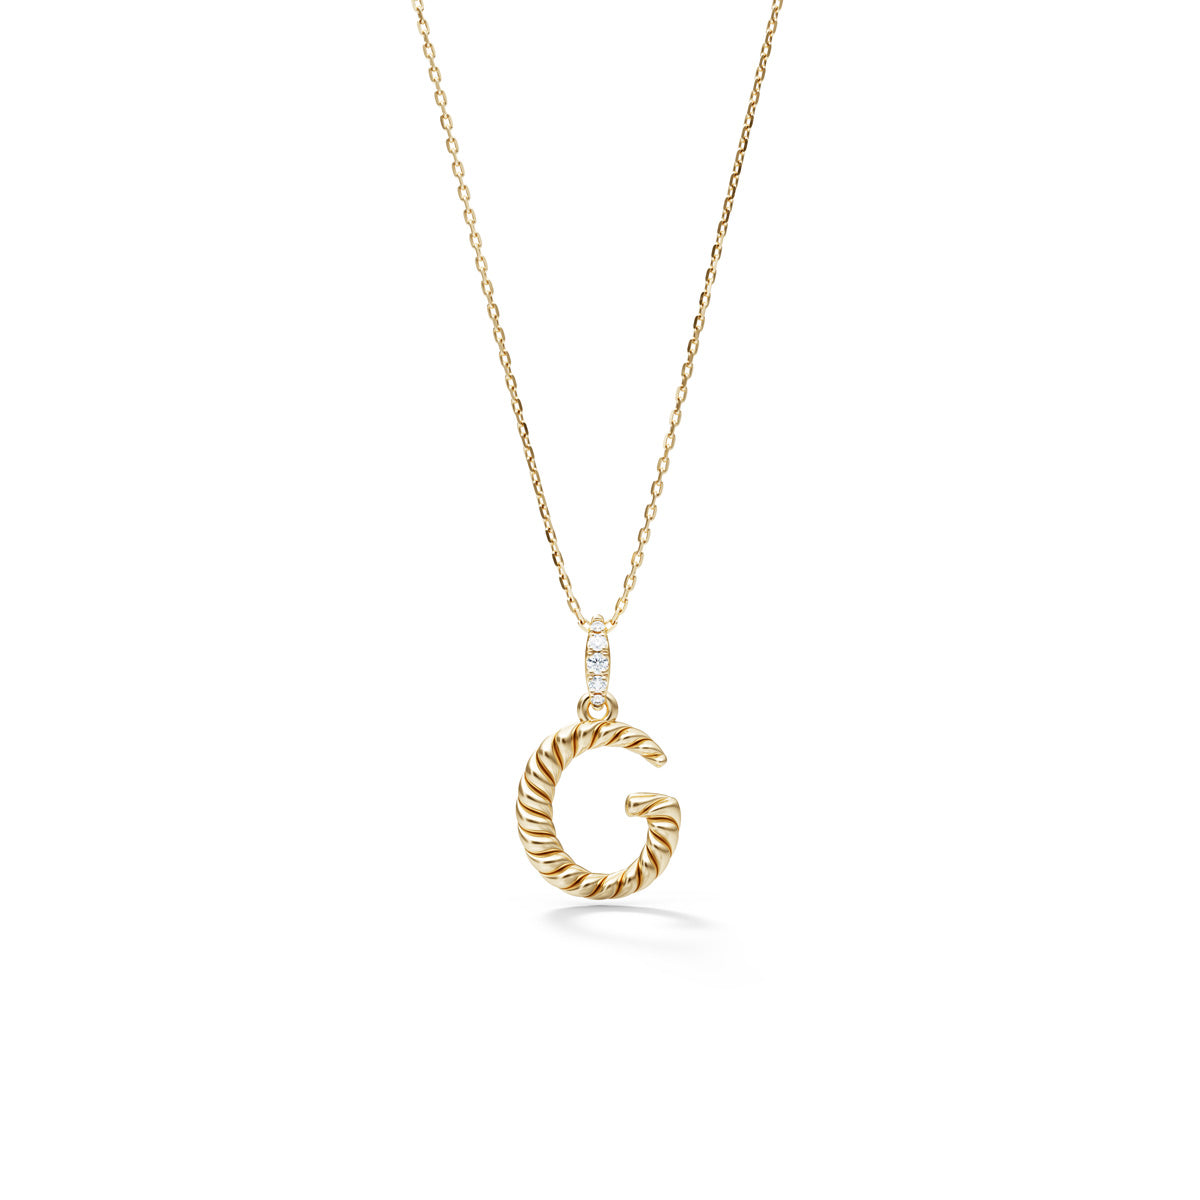 Personalized 5 Letter Necklace in 14k Gold (Double Spacing)